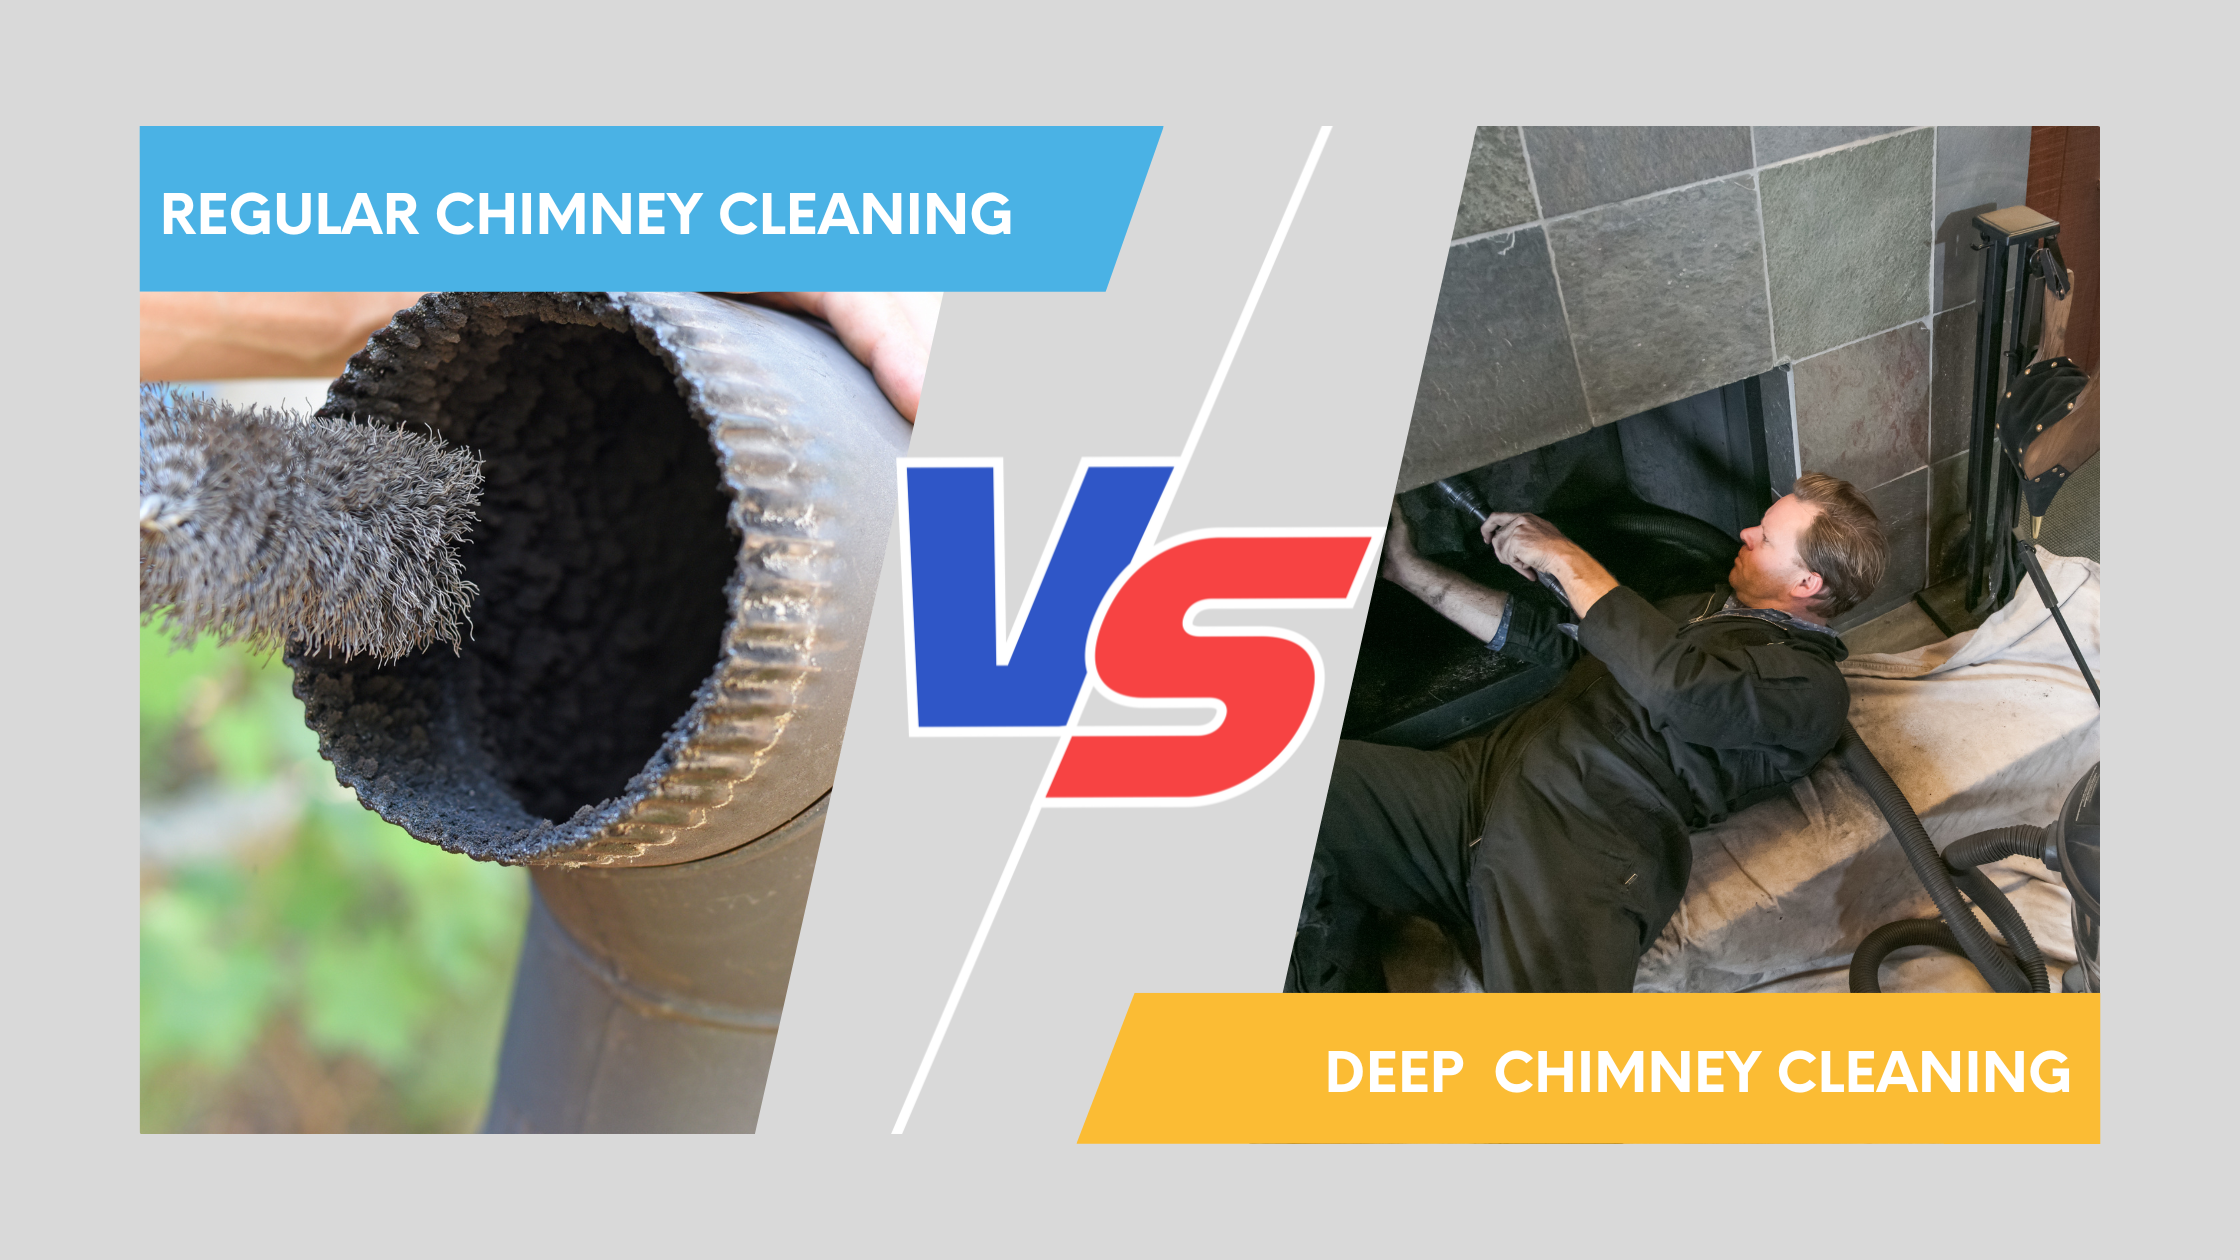 Regular cleaning vs deep cleaning of the chimney